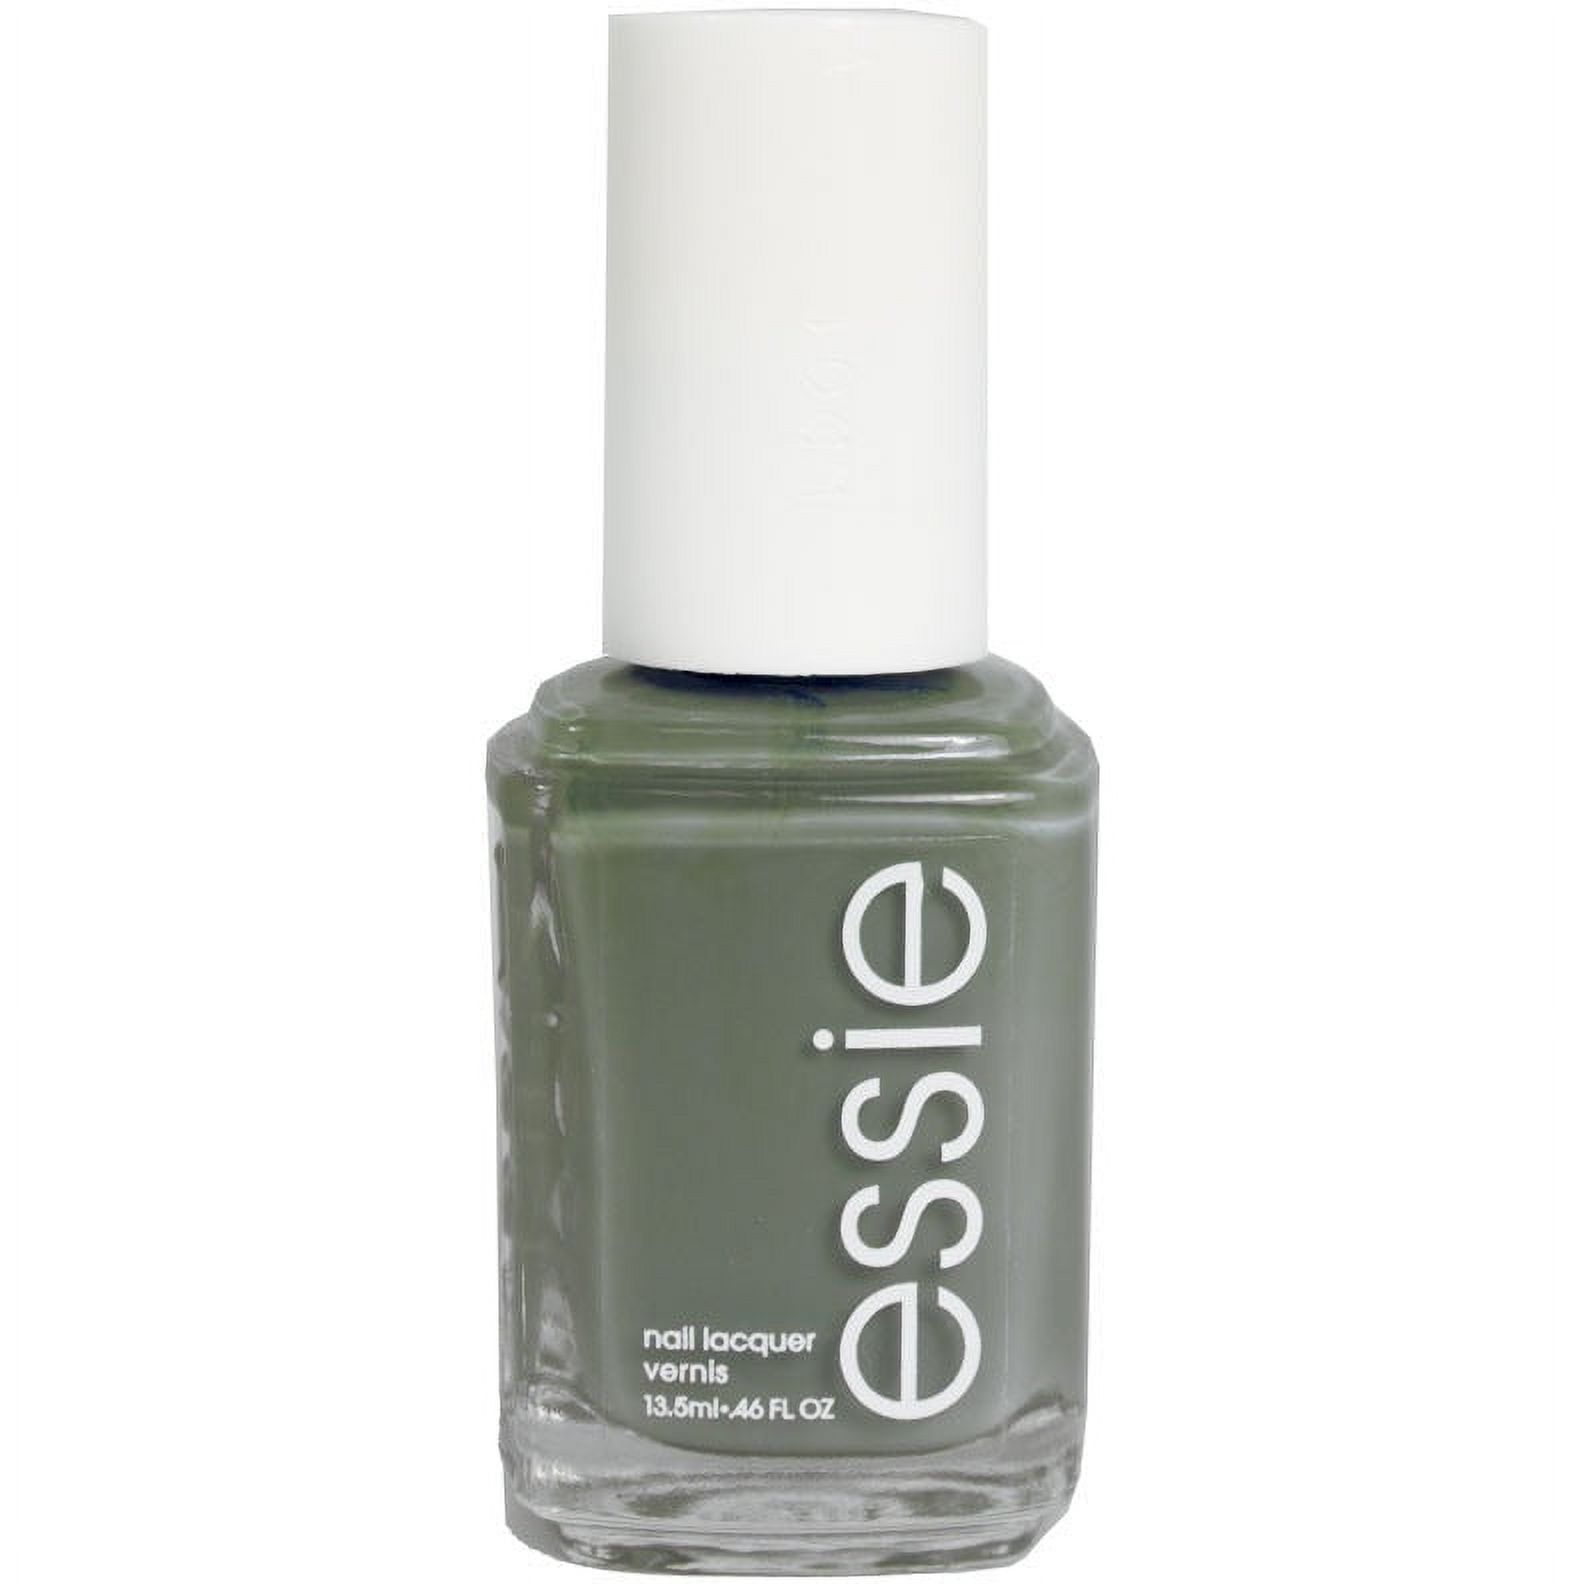 essie Glossy Nail Polish, 704 Sew Psyched, 0.46 fl oz Bottle - image 1 of 59